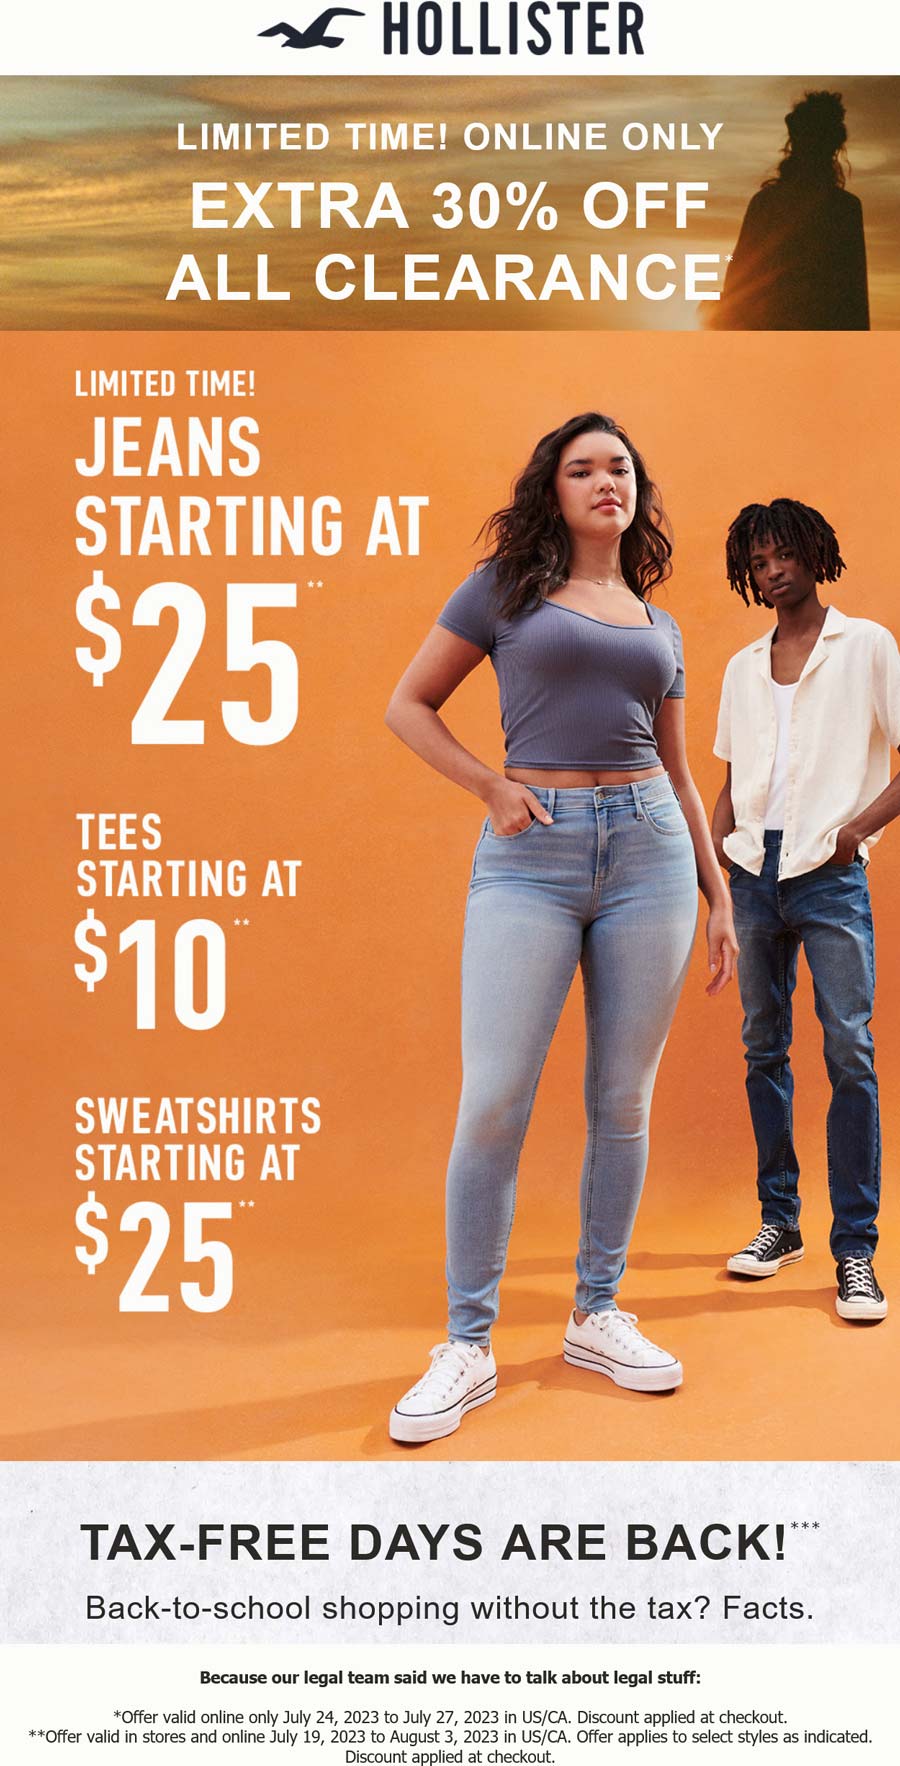 Hollister stores Coupon  Extra 30% off clearance online at Hollister #hollister 